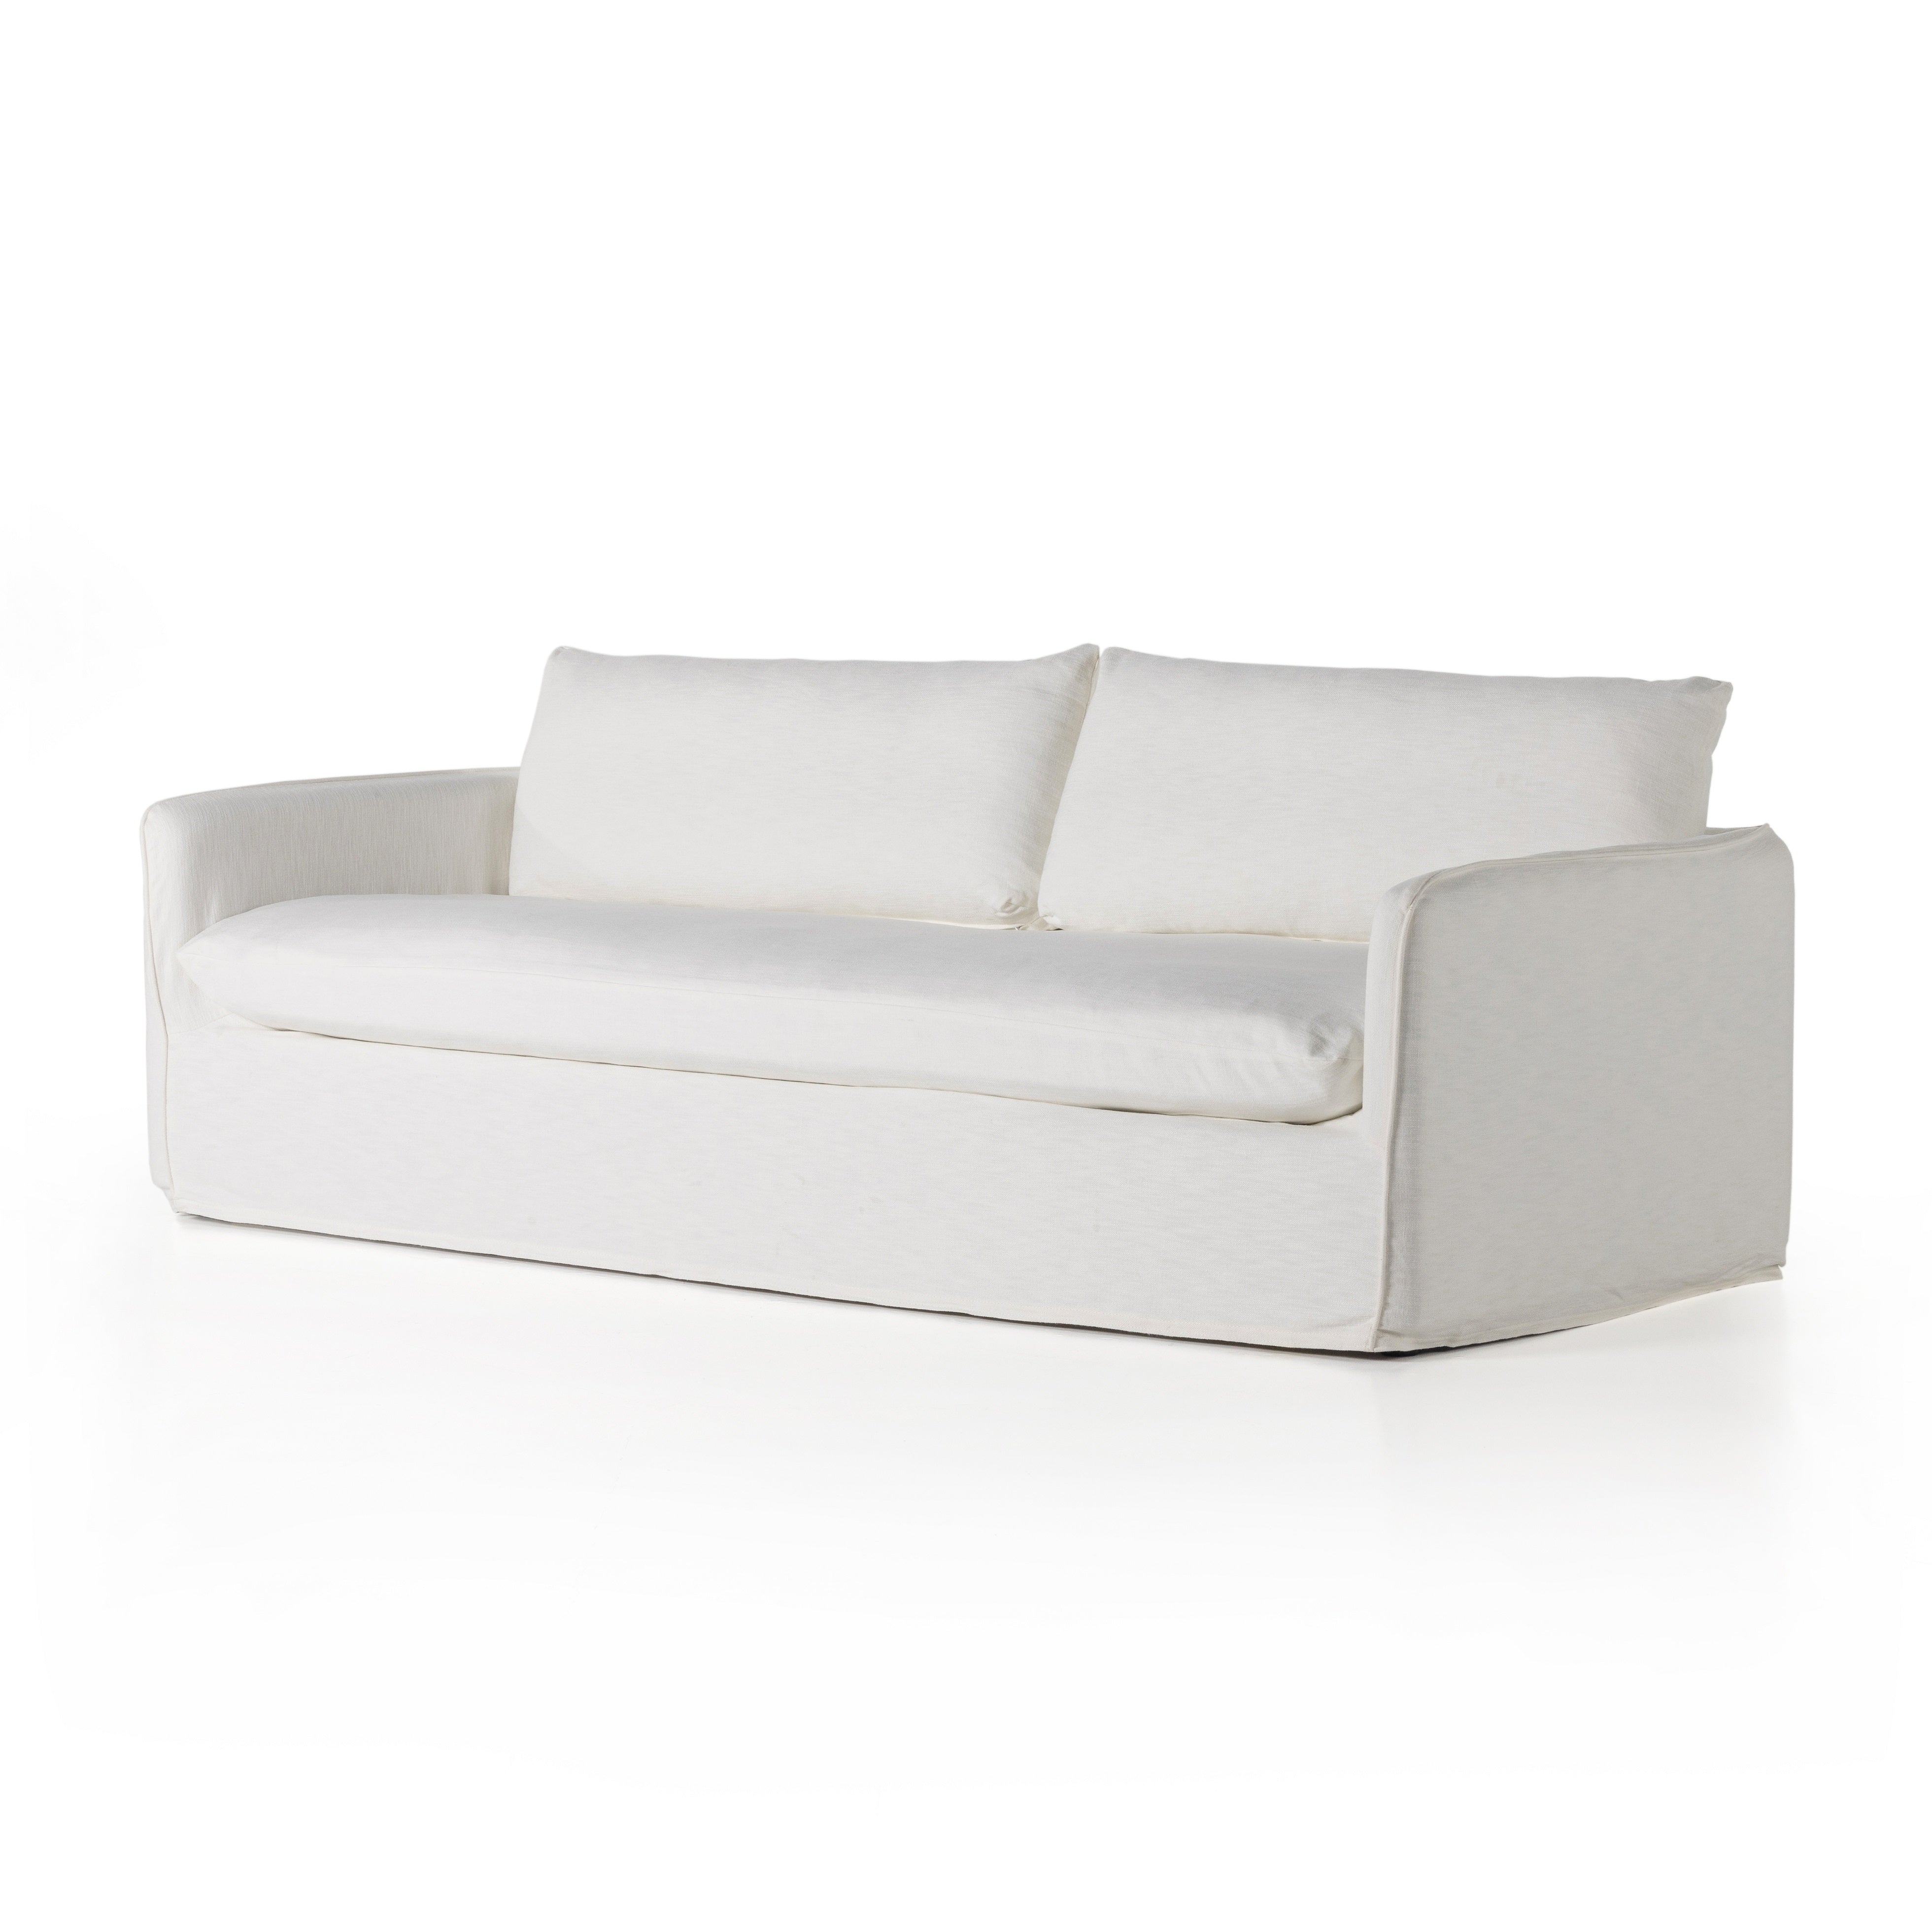 Capella Bergamo Cream Slipcover Sofa is clean and casual with contemporary touches. A cotton- and linen-blend slipcovered sofa features tapered arms and flange detailing for a sharp silhouette. Feather-blend knife-edge cushions mean total comfort. Slipcover machine washable for modern ease. Amethyst Home provides interior design services, furniture, rugs, and lighting in the Los Angeles metro area.